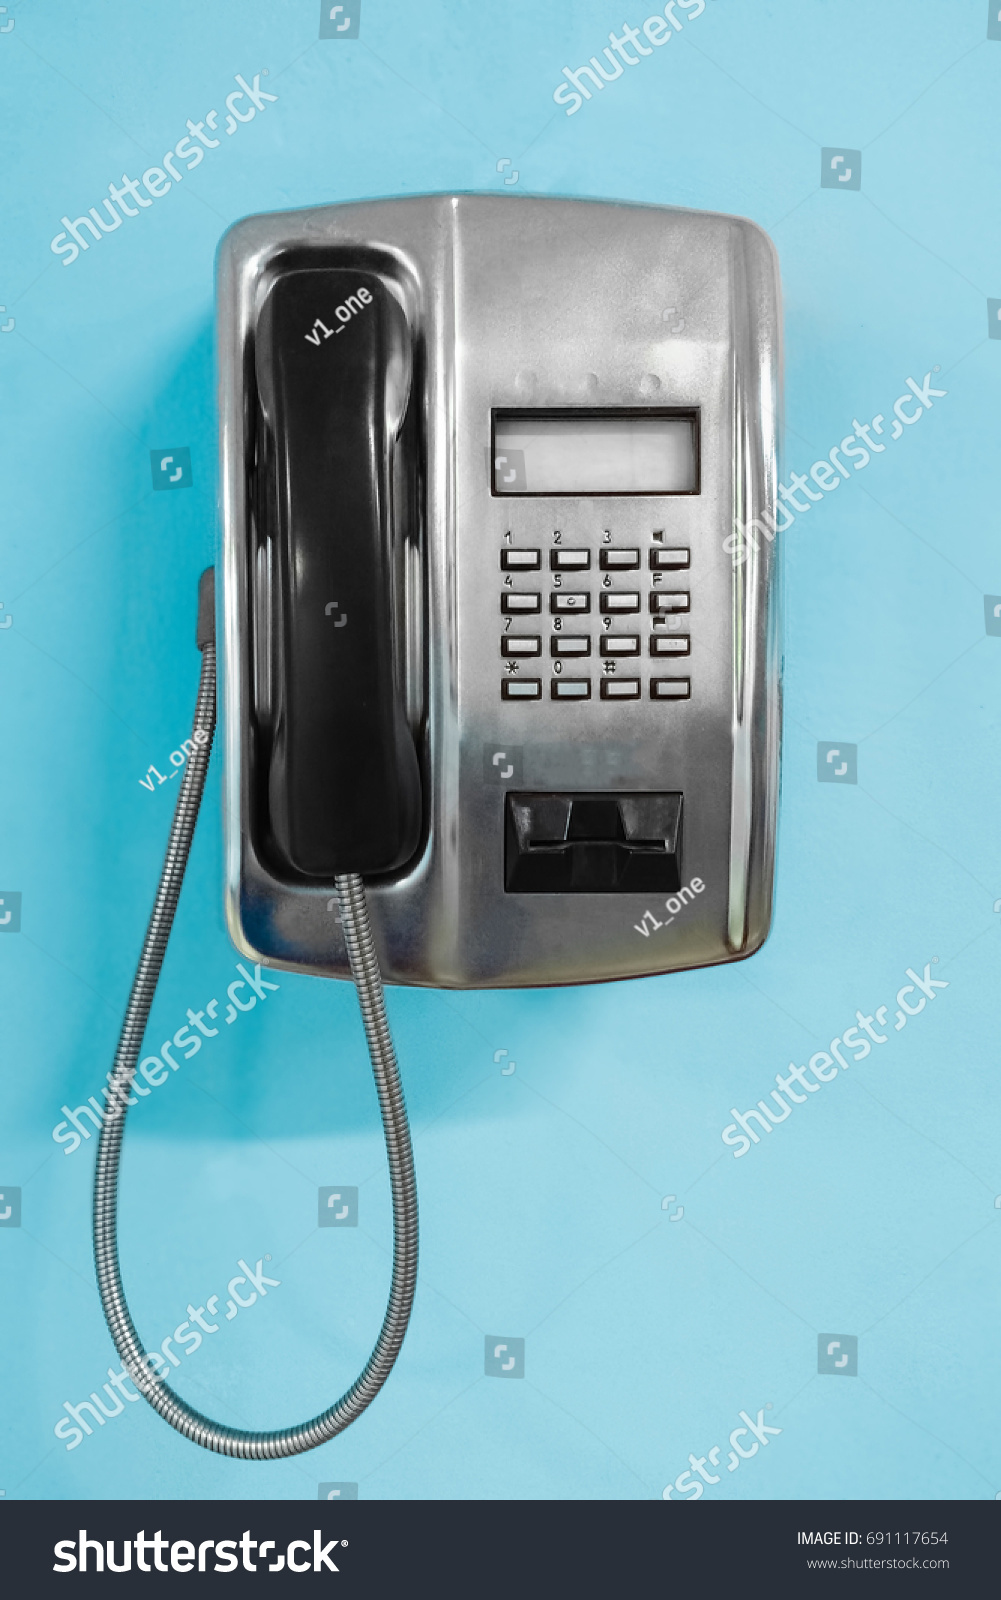 Metal Public Telephone on blue wall. Old payphone concept #691117654